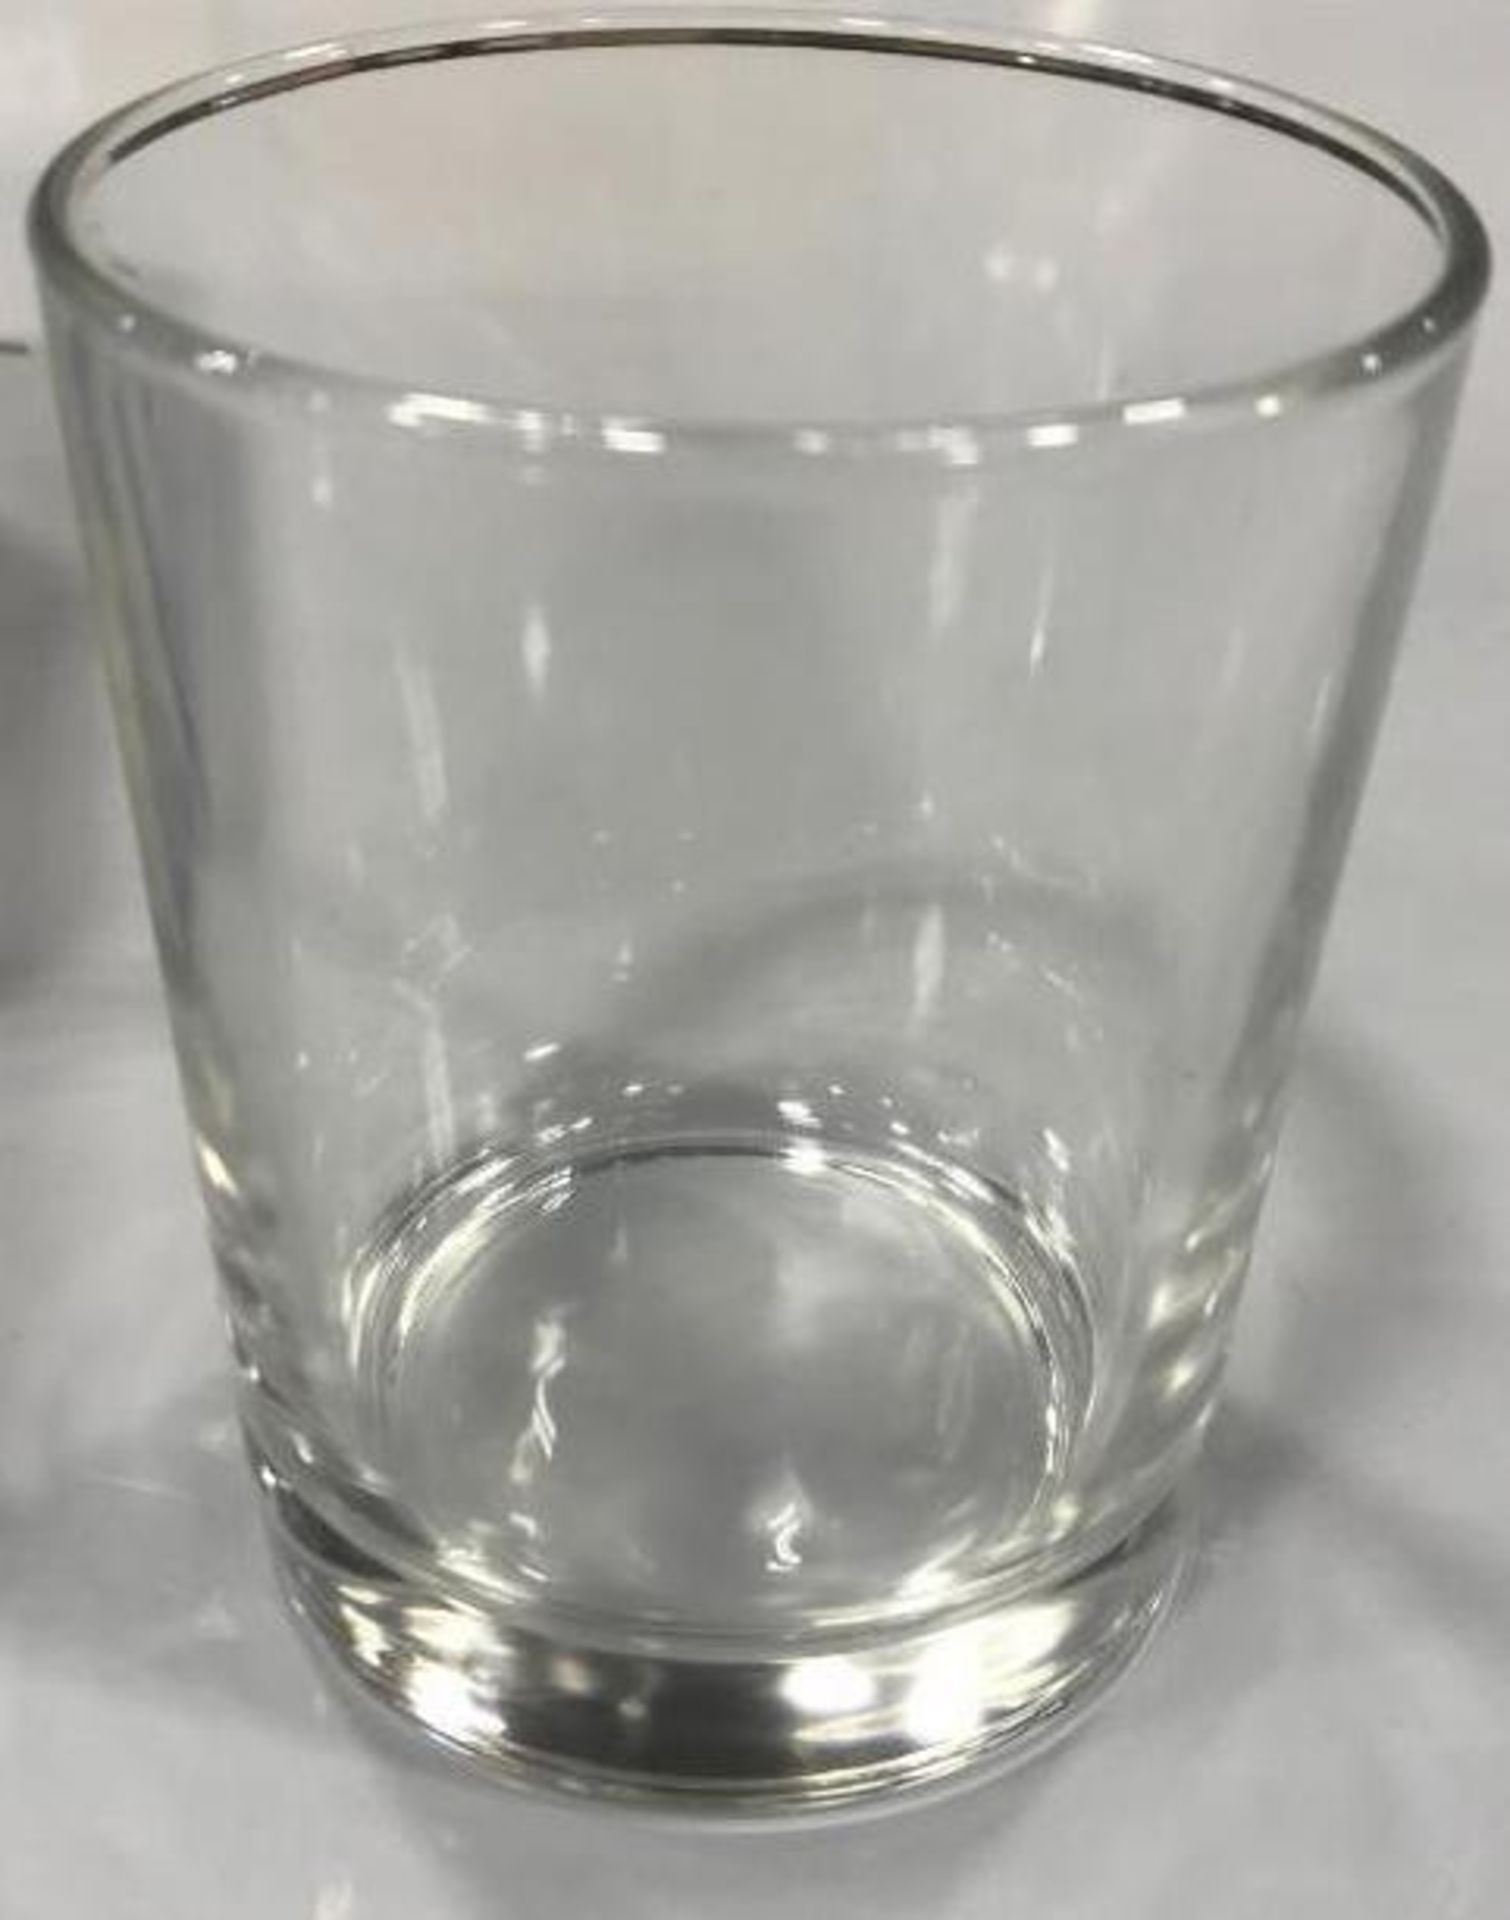 9.5OZ/270ML STOCKHOLM OLD FASHIONED GLASSES - BOX OF 6, ARCOROC 00826 - NEW - Image 2 of 2